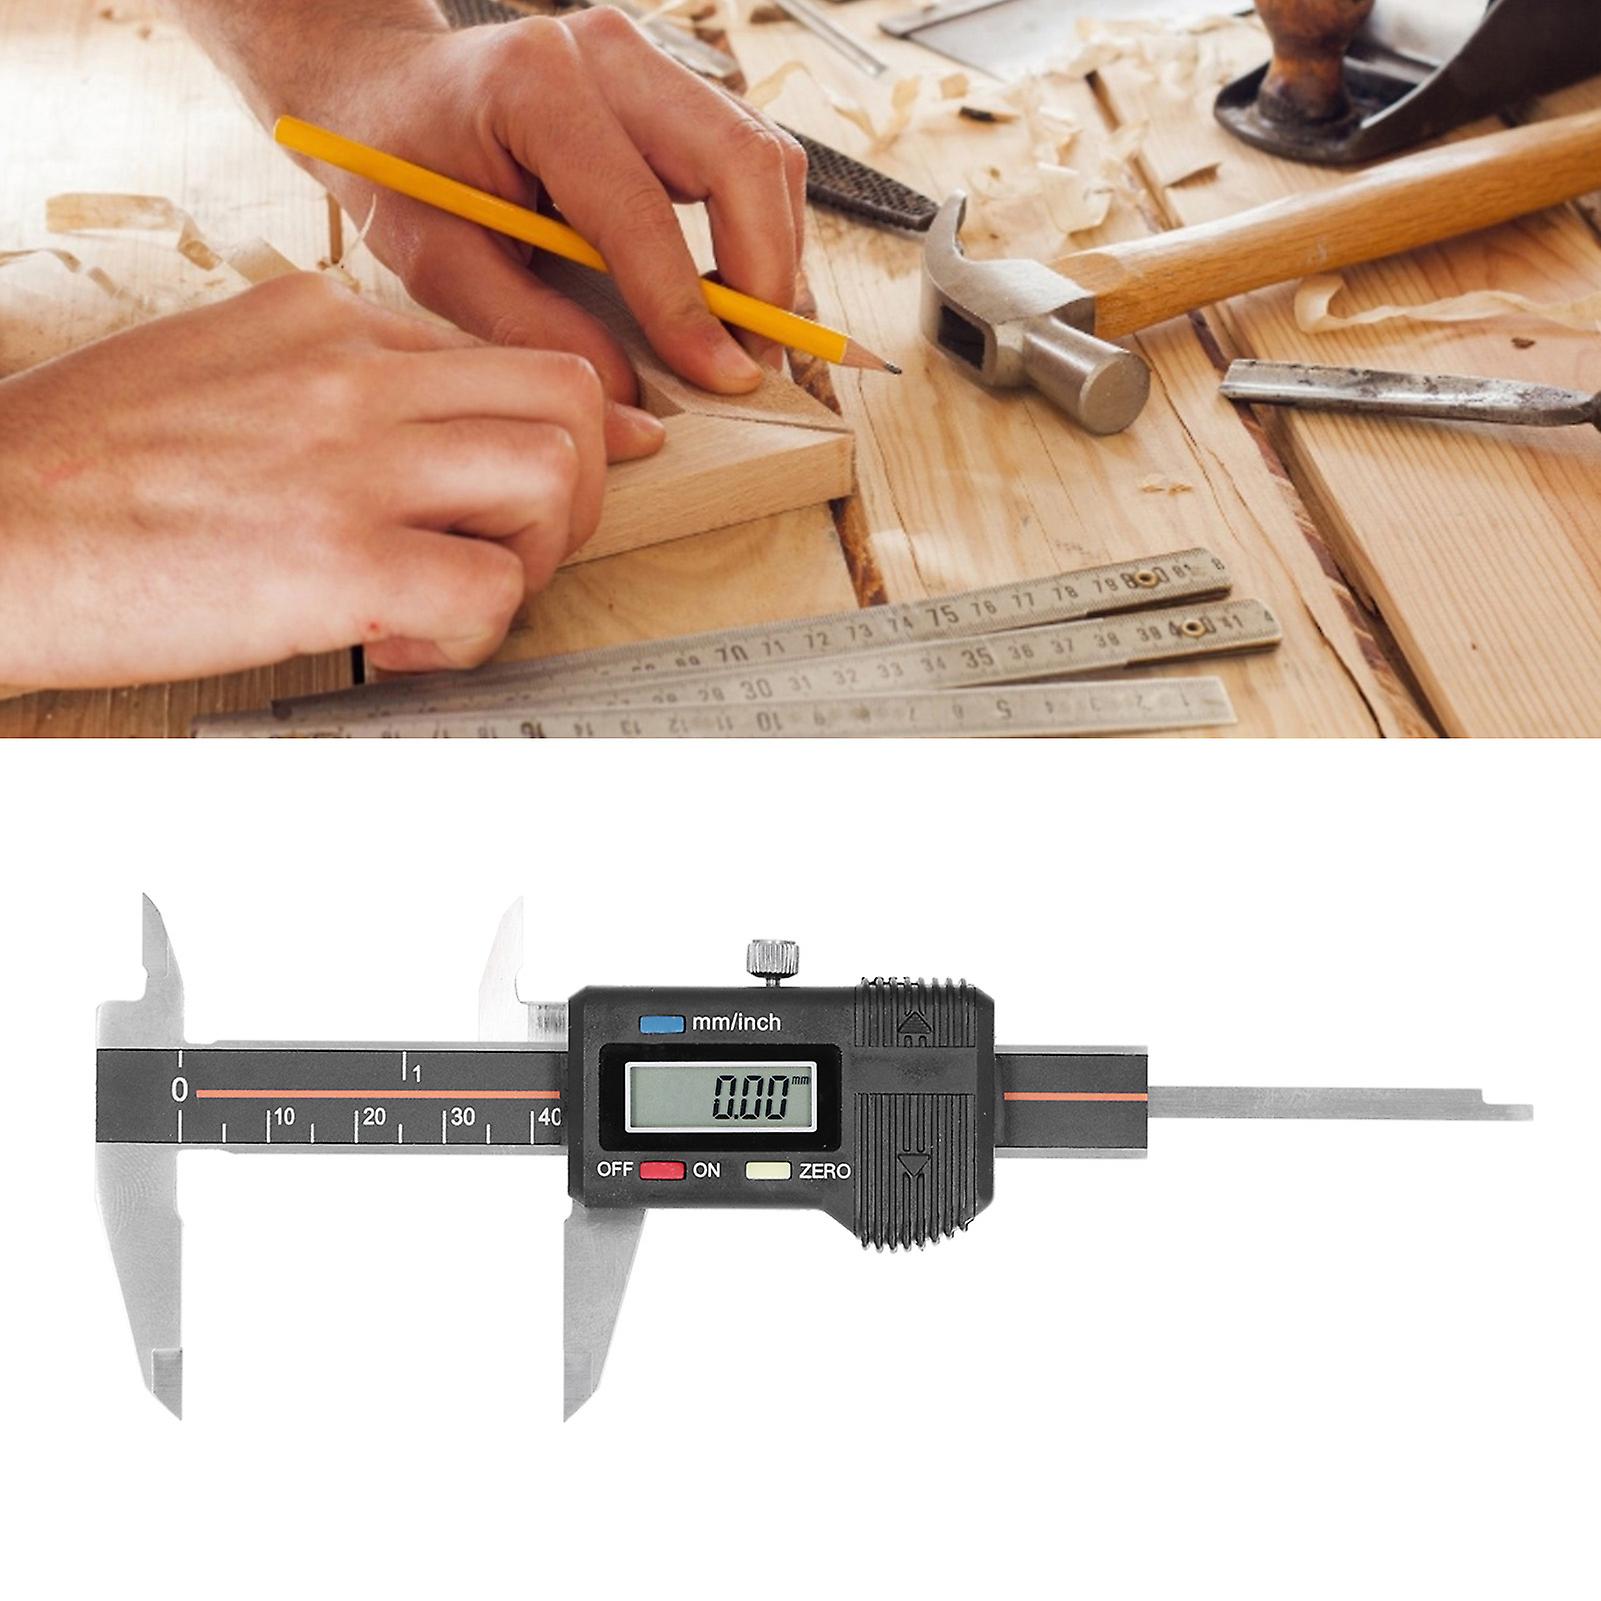 Digital Caliper Portable Electronic Measuring Tool For Mechanical Processing - Stainless Steel With Clear Reading Screen